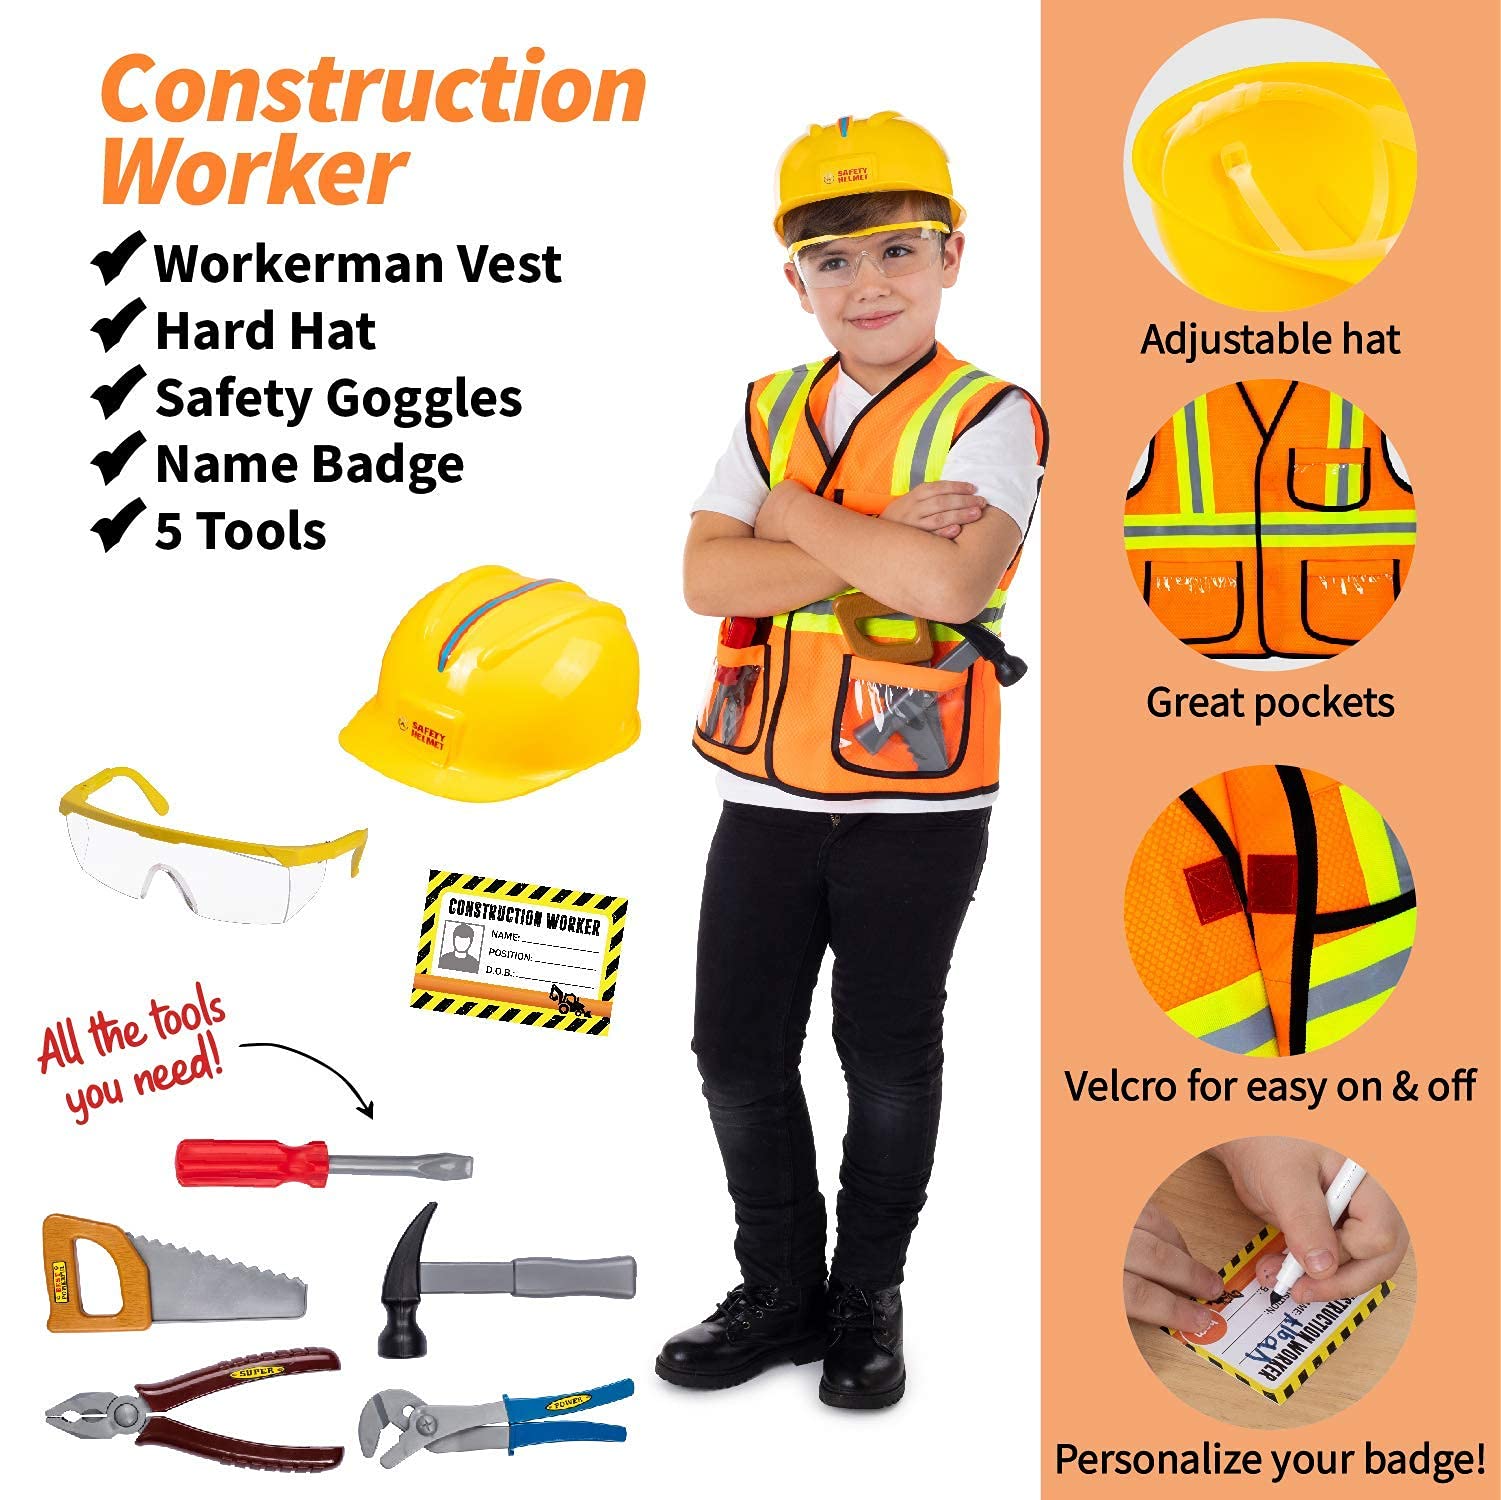 Born Toys Police Costume, Fireman Costume, and Bundle set of Construction Worker, Gardening, and Chef Set for Boys and Girls Dress Up & Pretend Play Ages 3-7